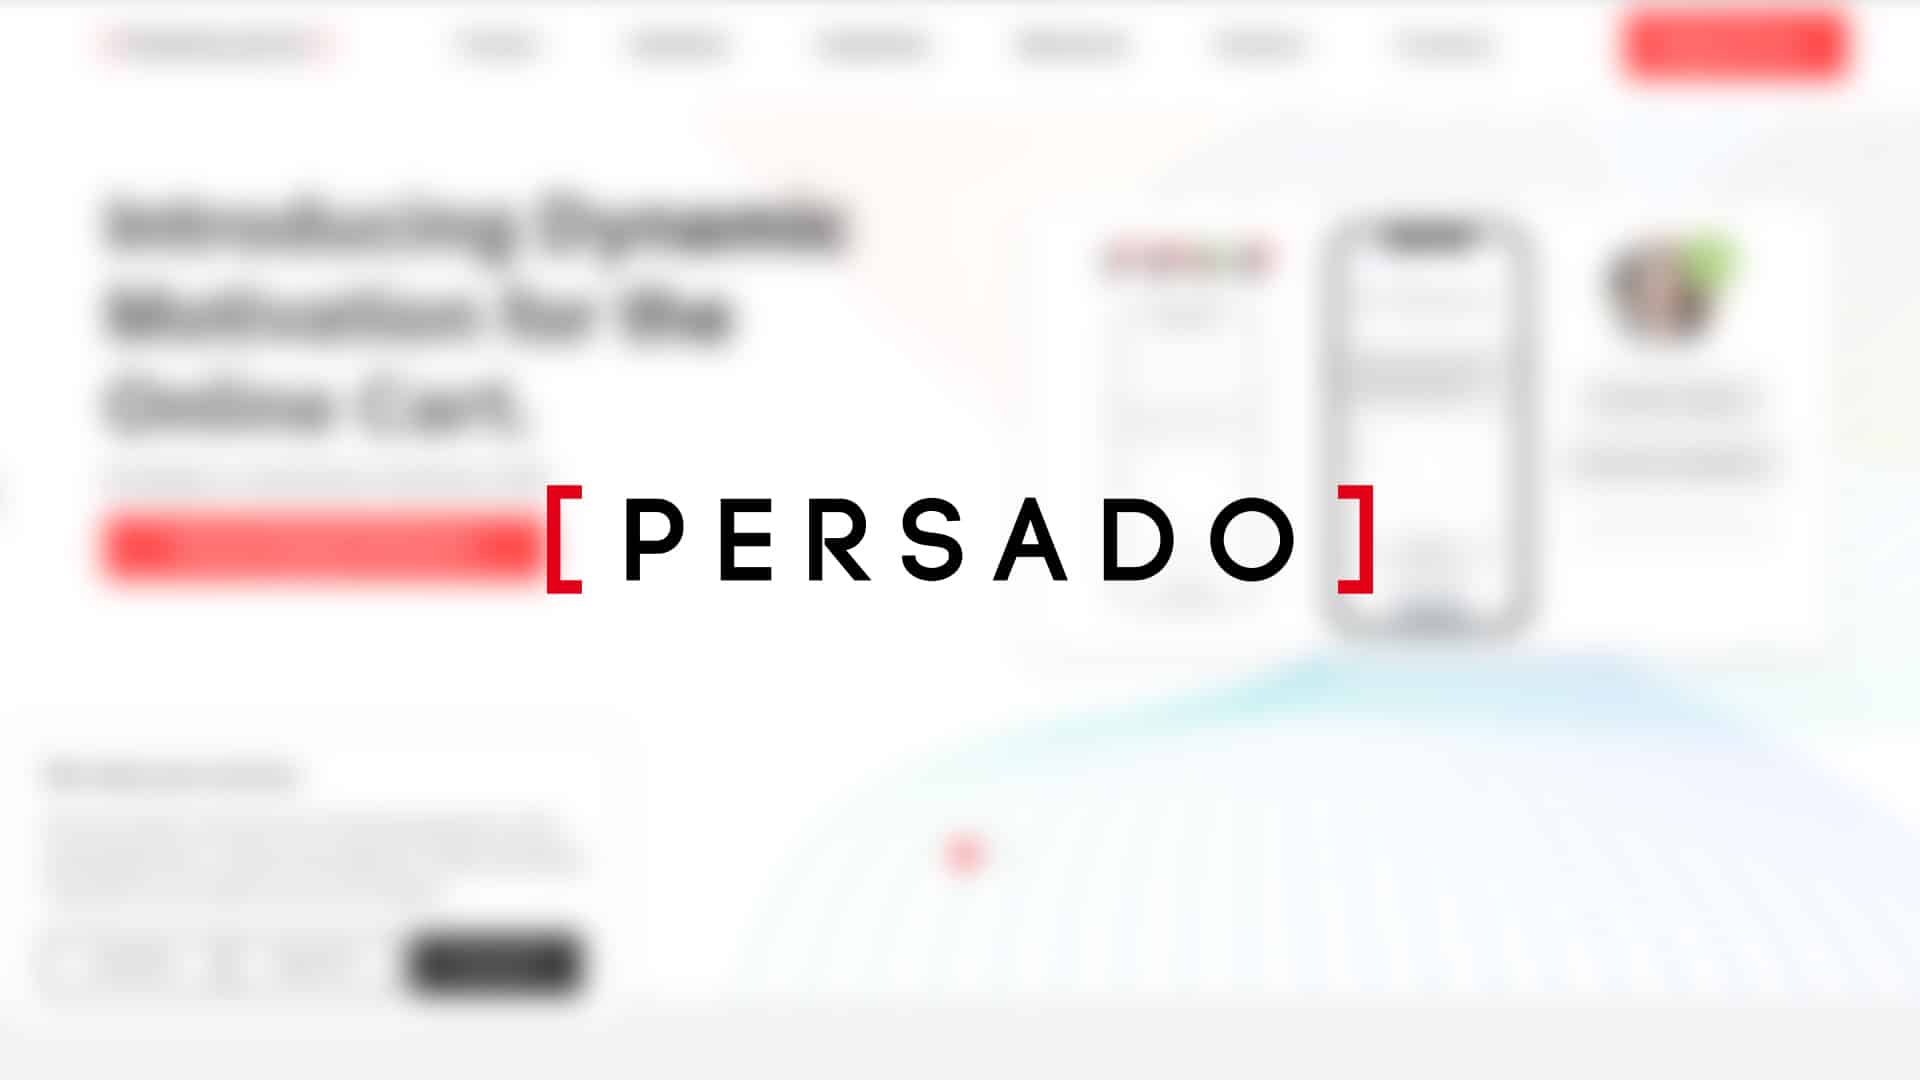 Persado for Email Marketing